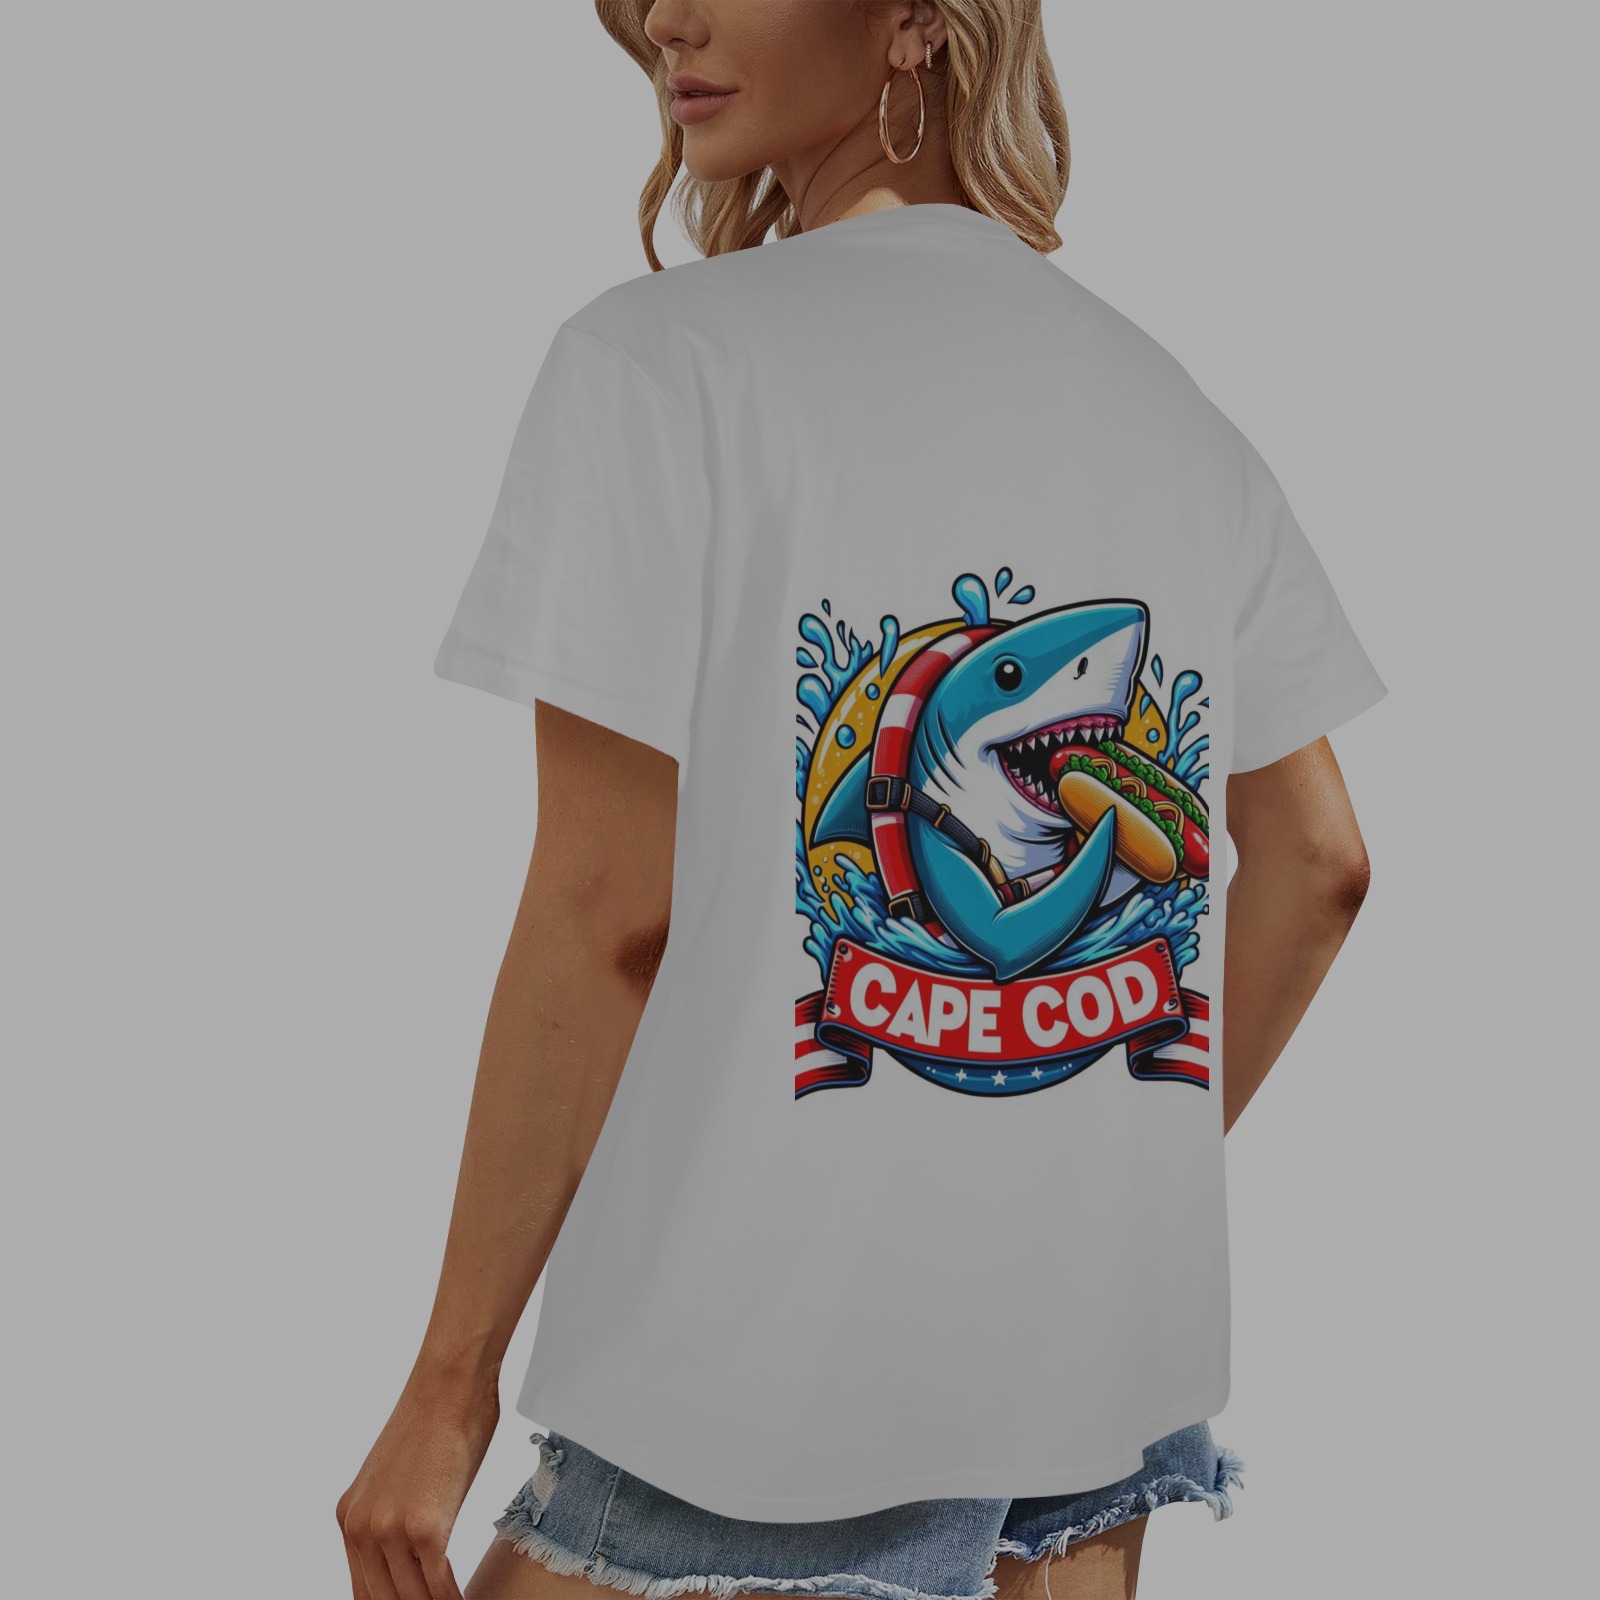 CAPE COD-GREAT WHITE EATING HOT DOG Women's Glow in the Dark T-shirt (Two Sides Printing)